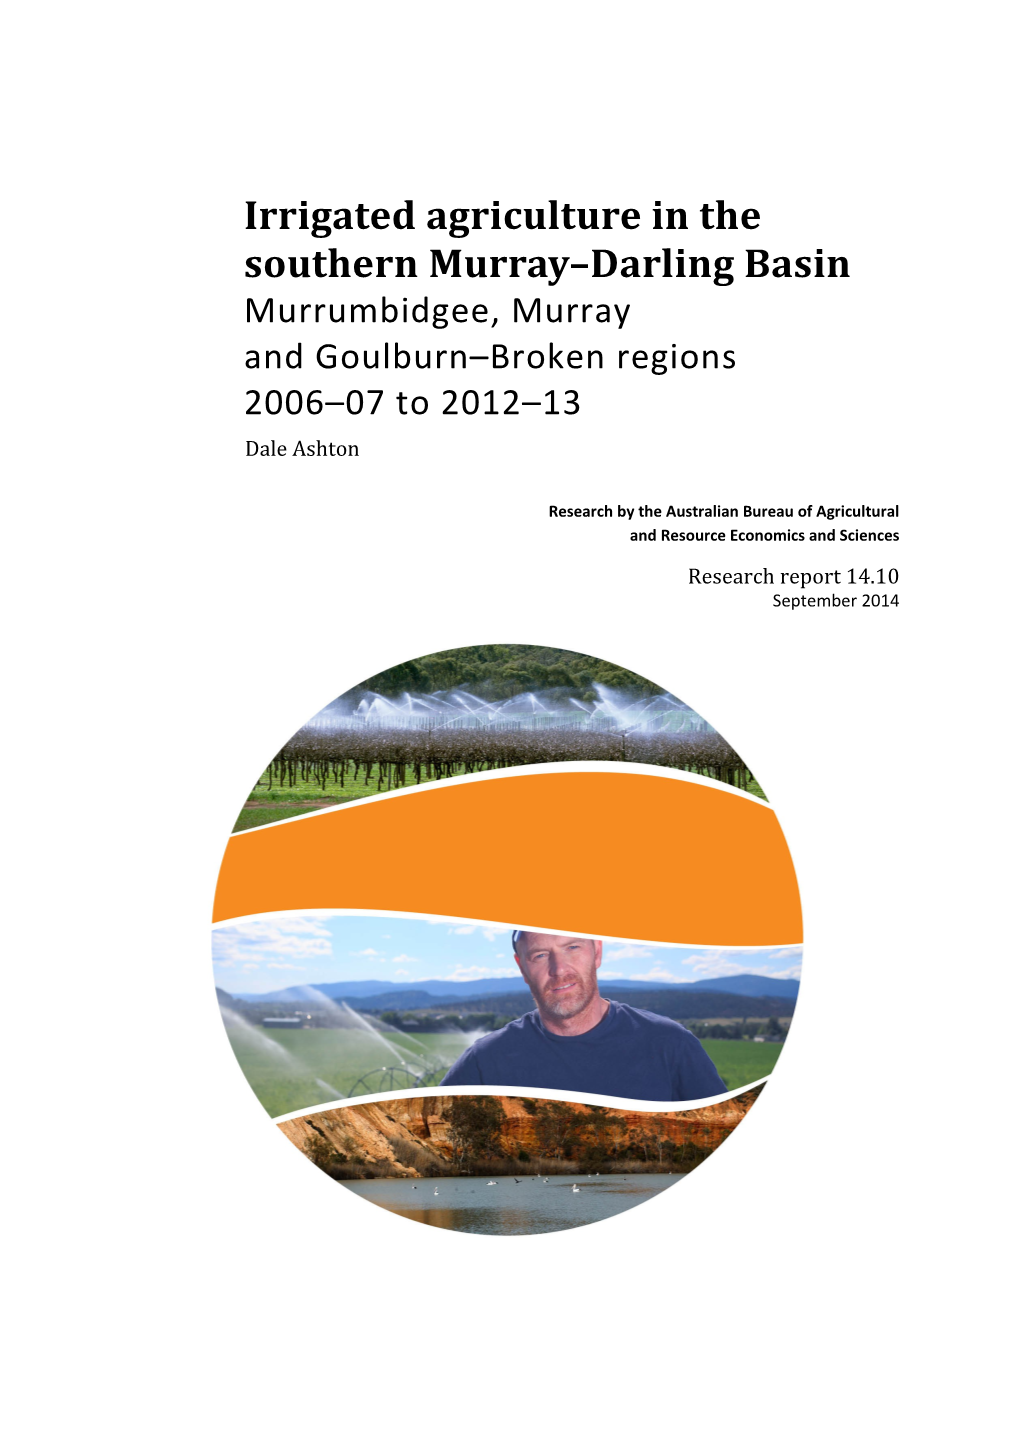 Irrigated Agriculture in the Southern Murray Darling Basin